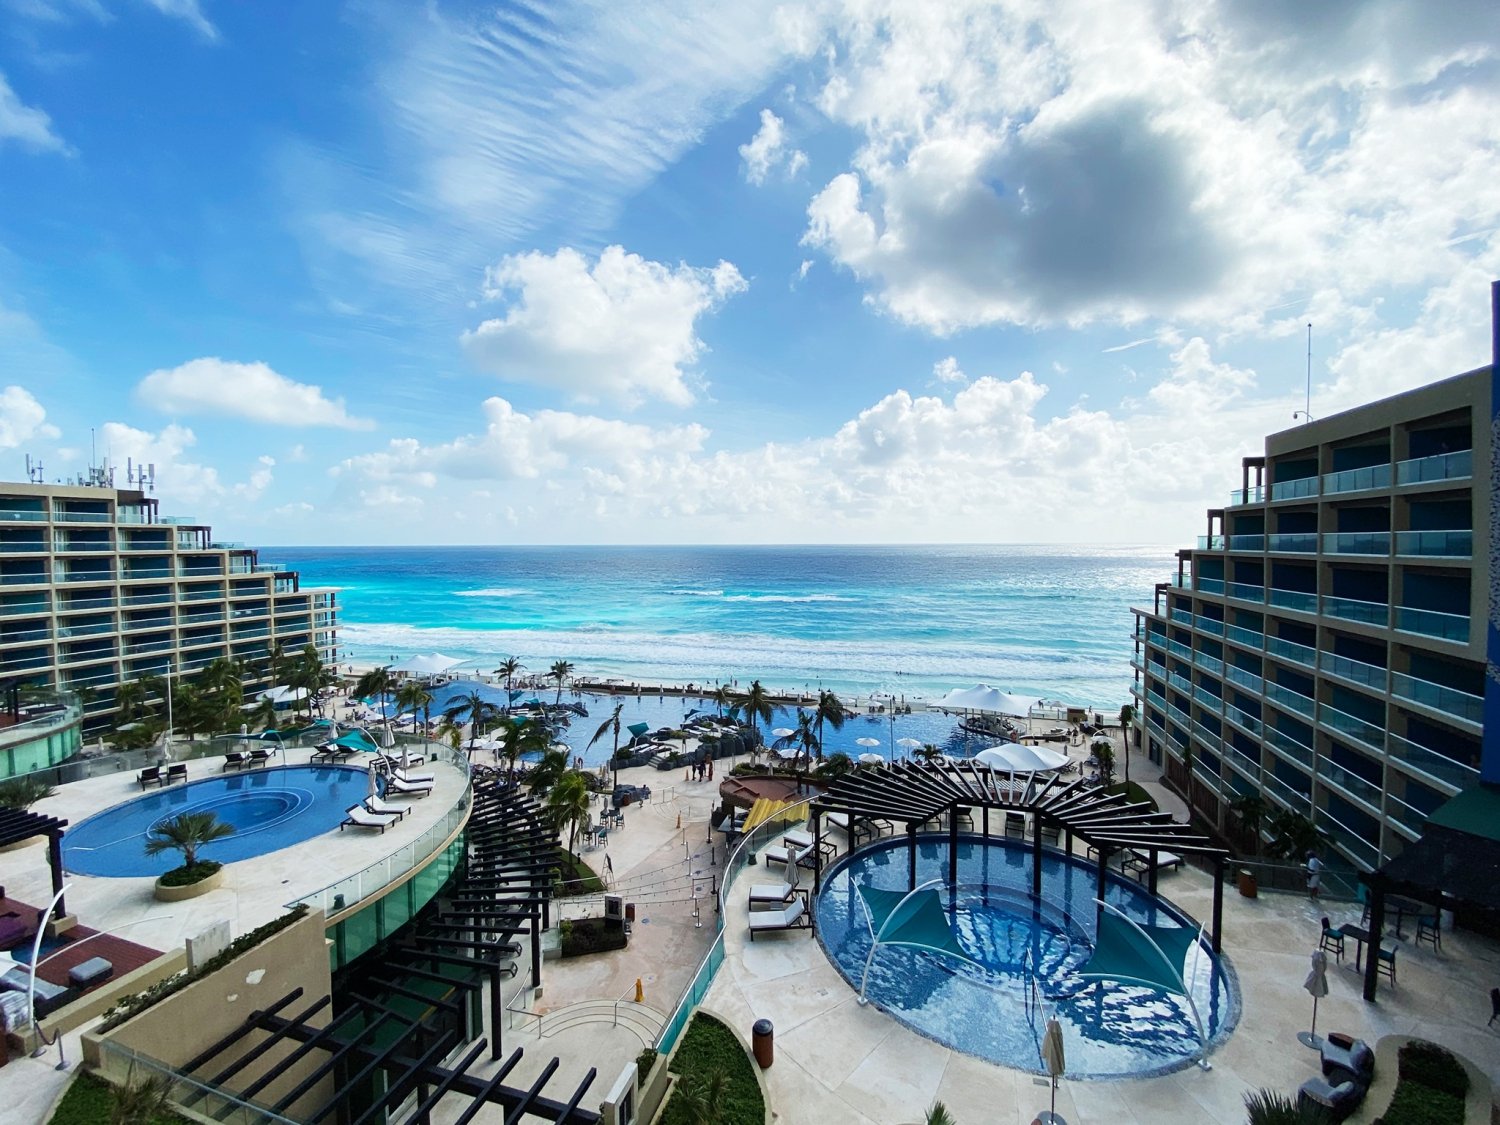 Best lodgings in Cancun for Easter Week 2023